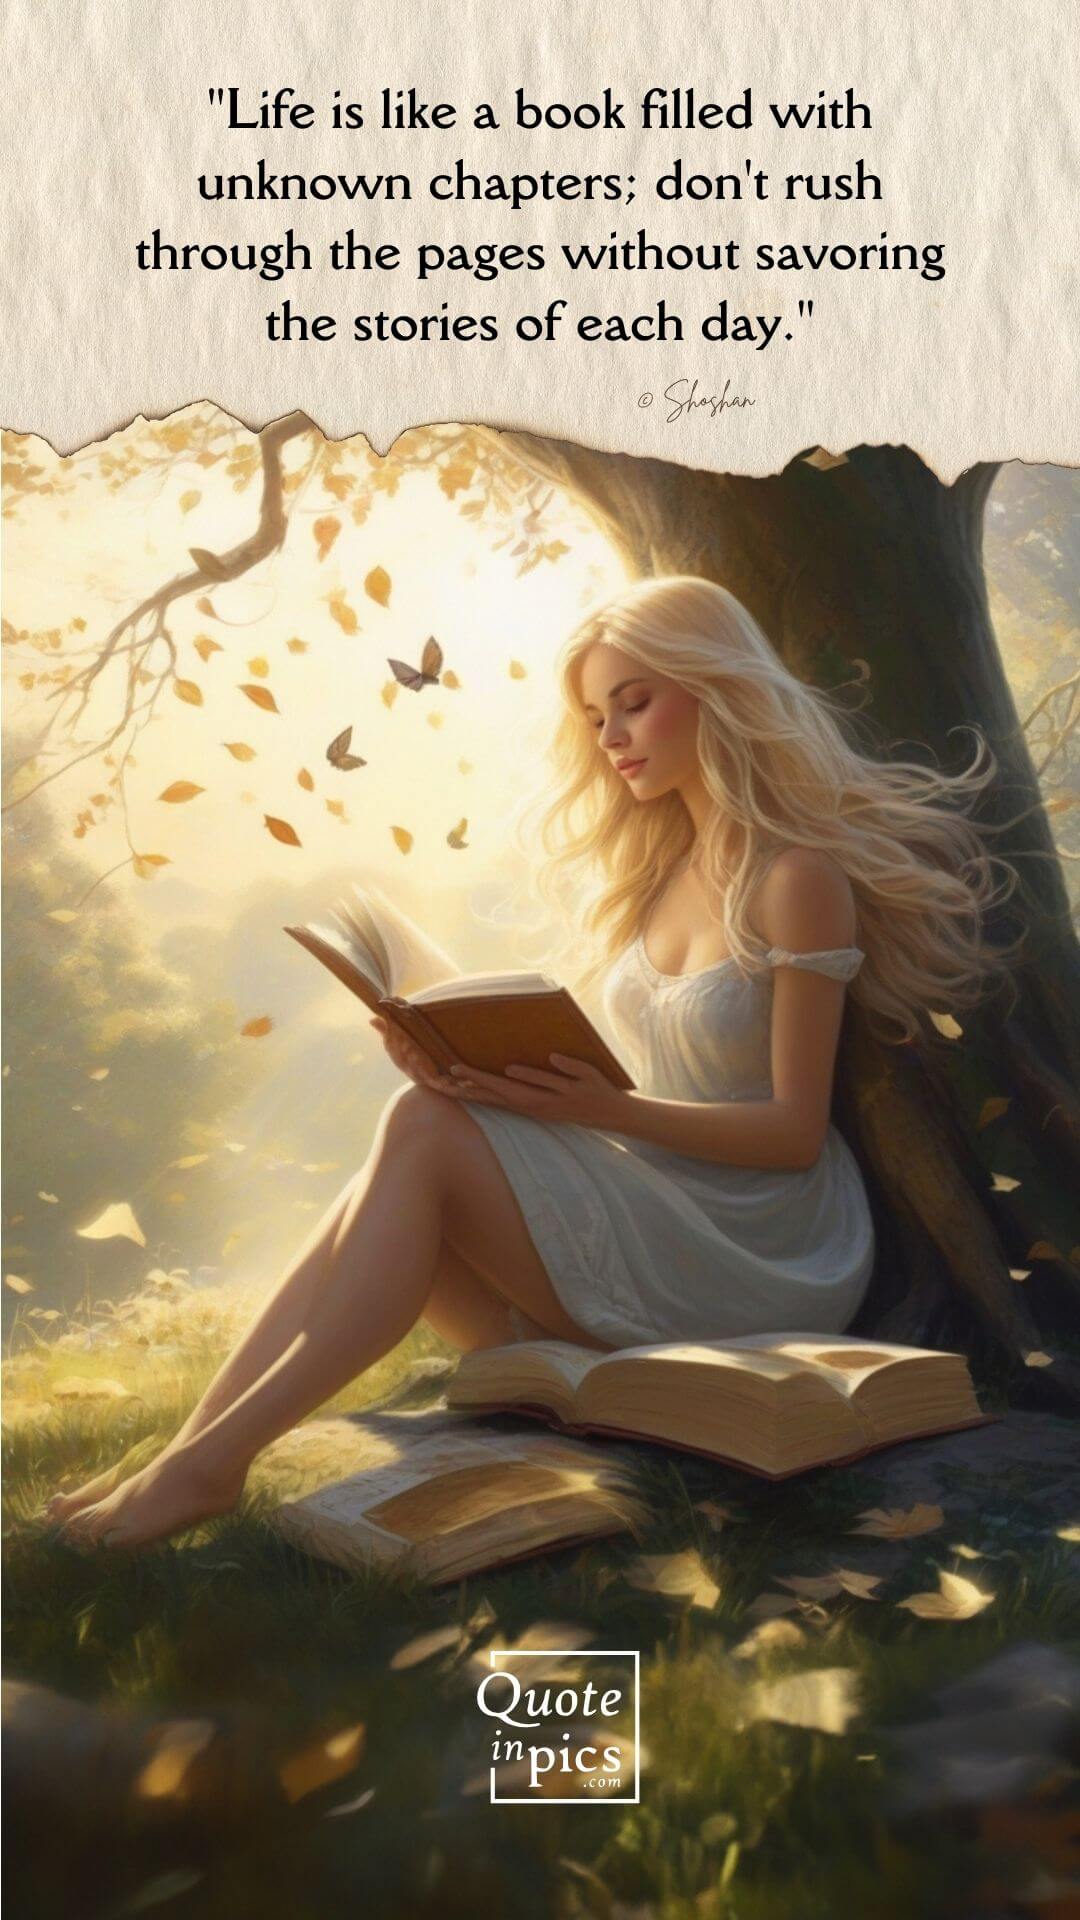 Life is like a book filled with unknown chapters; don't rush through the pages without savoring the stories of each day